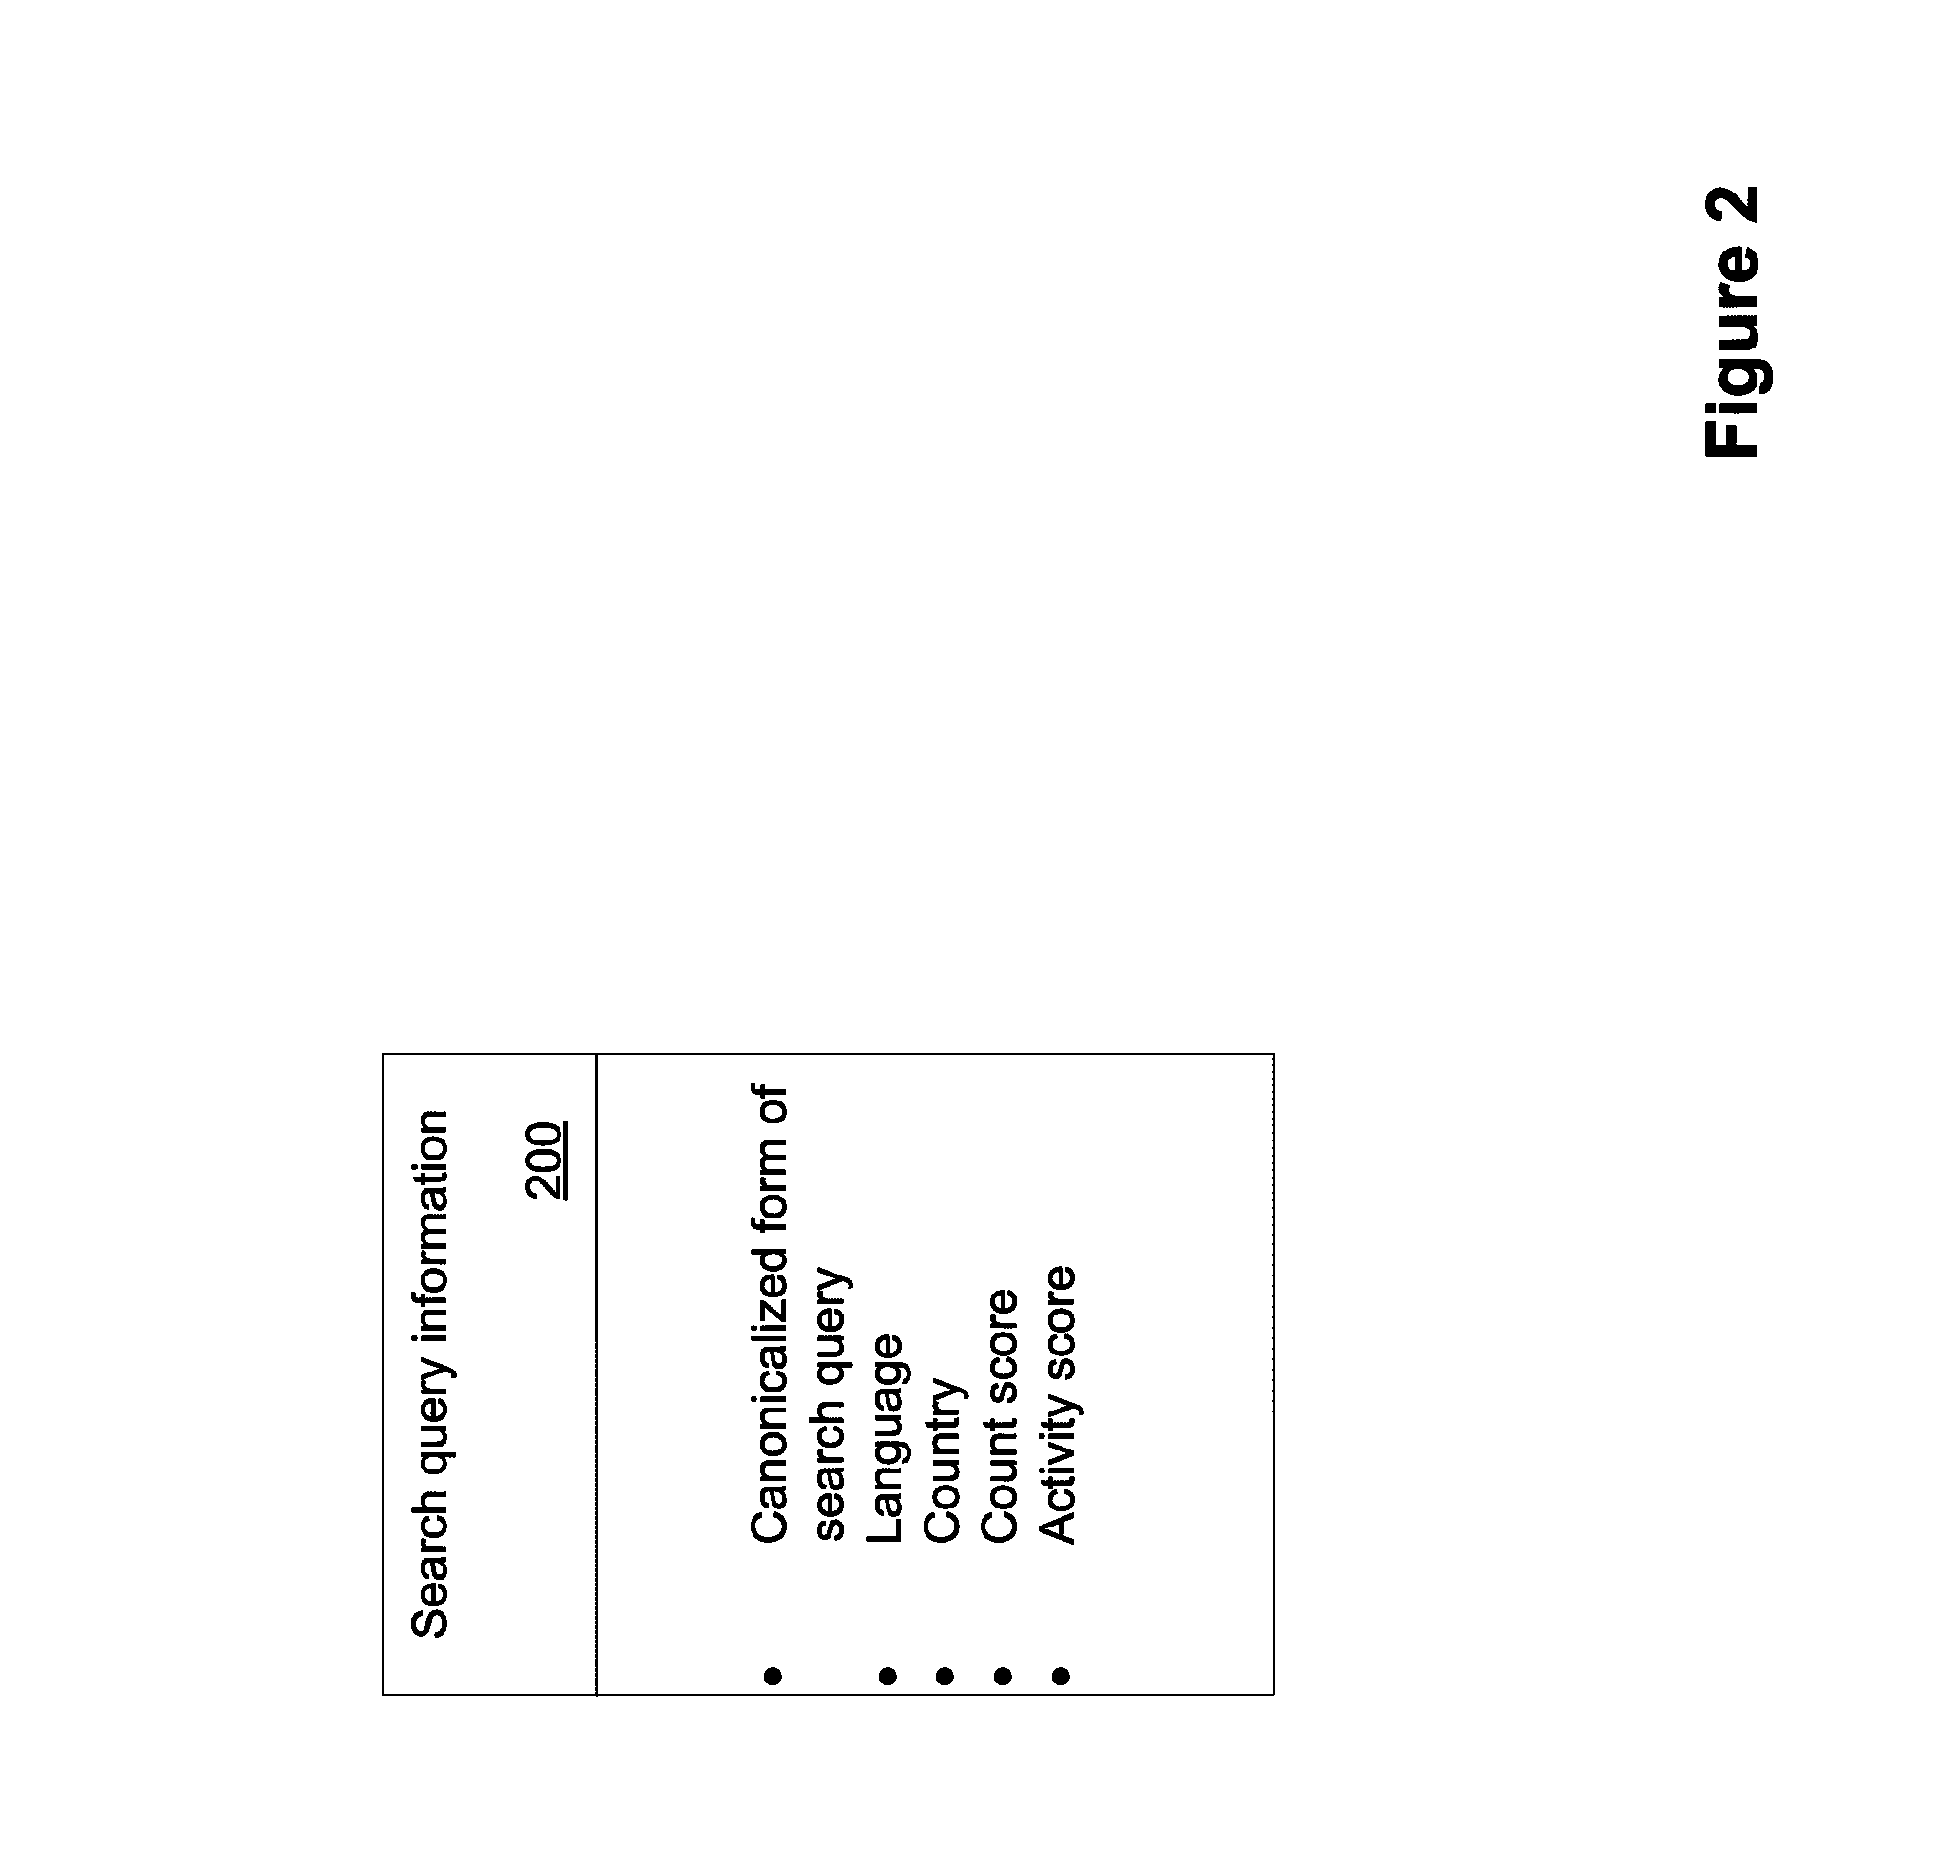 Method and system for displaying real time trends